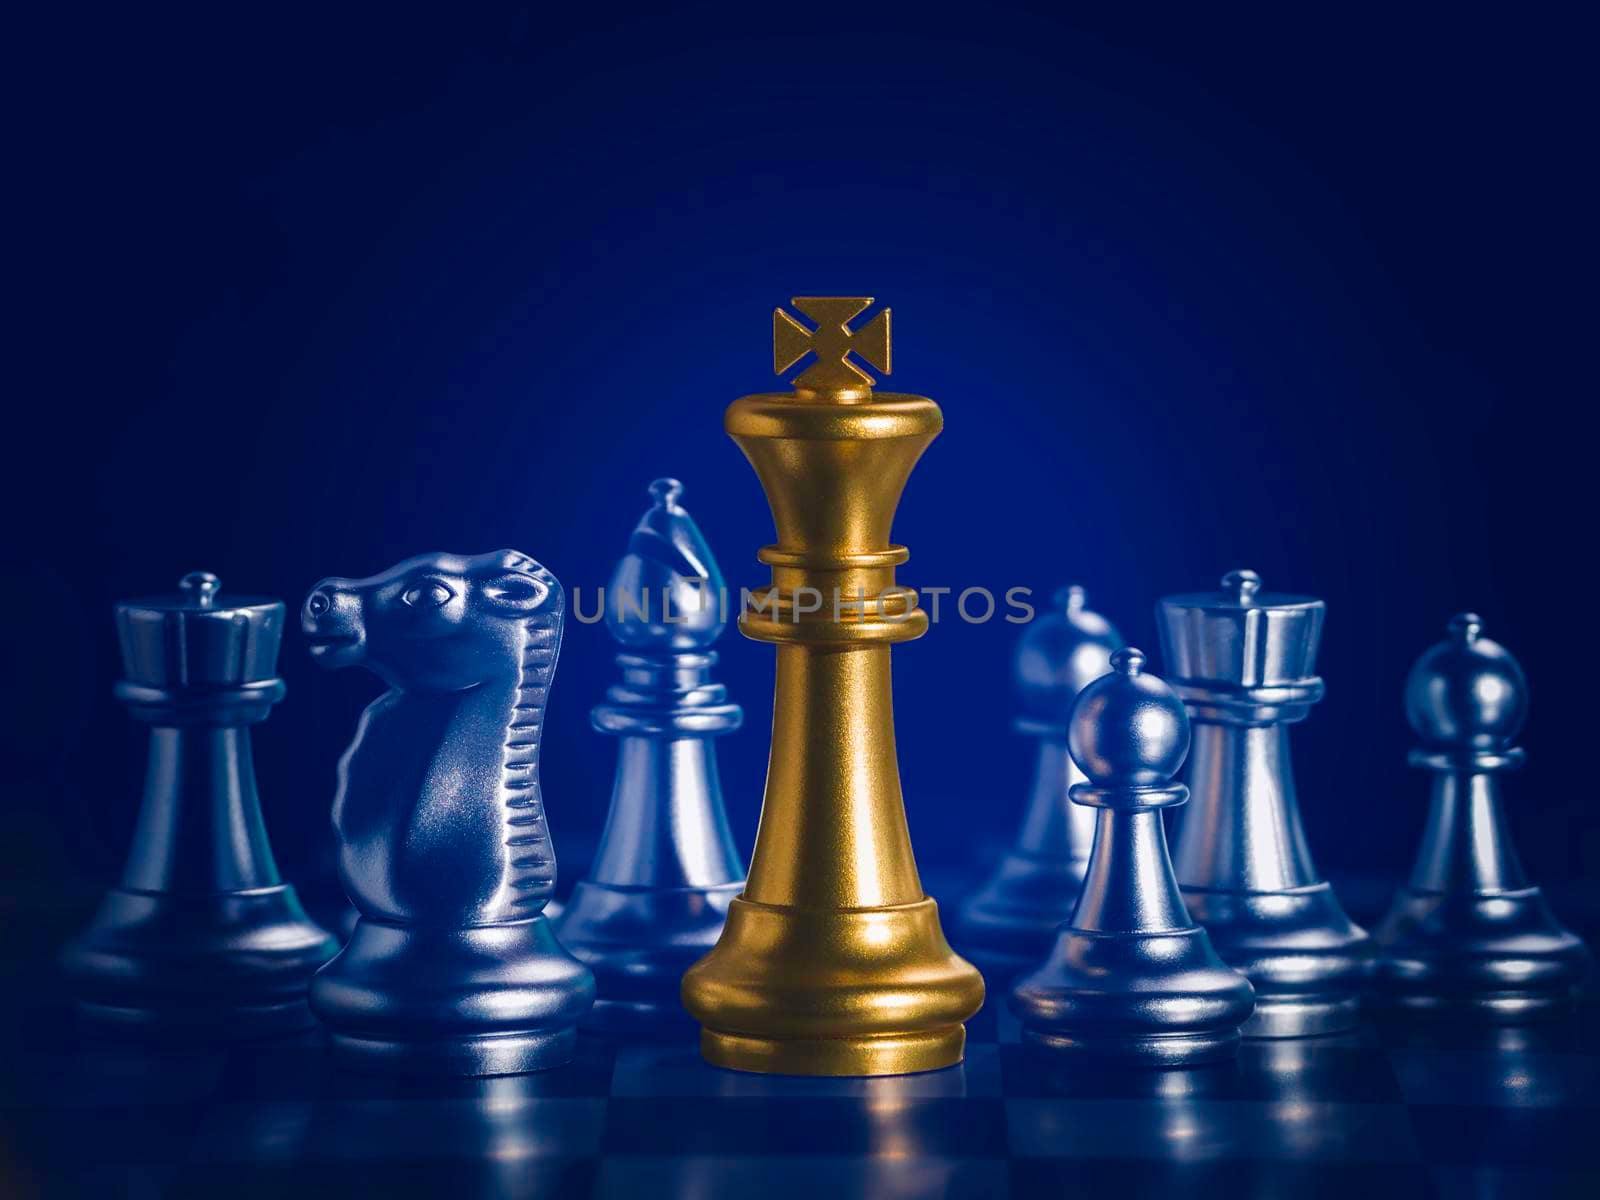 Golden king chess is surrounded by falling around silver chess pieces  to fighting with teamwork to victory, business strategy concept and leader and teamwork concept for success. by Chakreeyarut